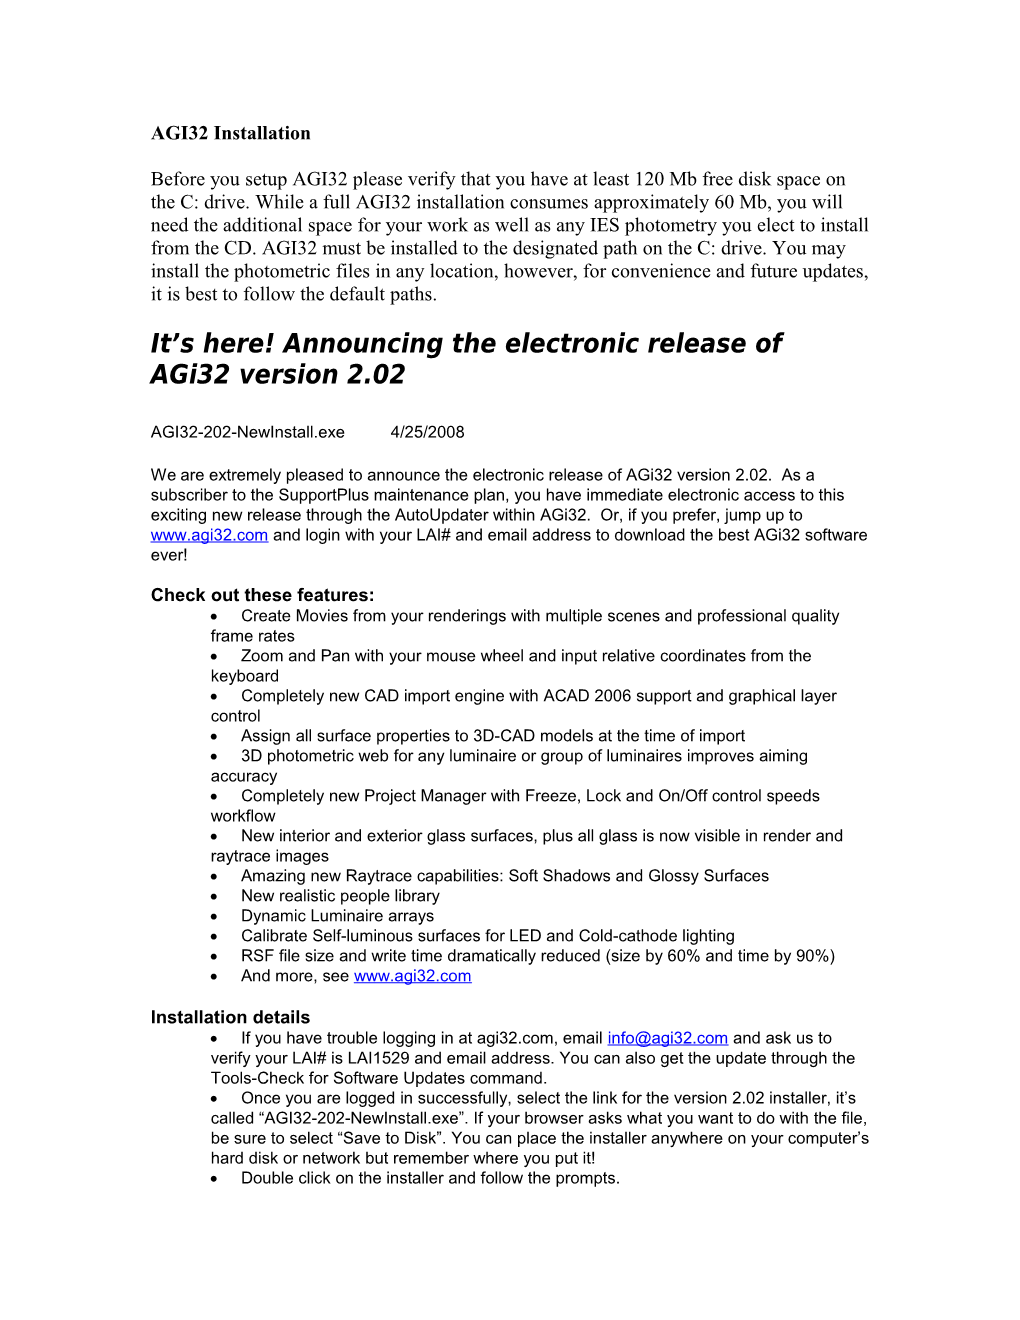 It S Here! Announcing the Electronic Release of Agi32 Version 2.02